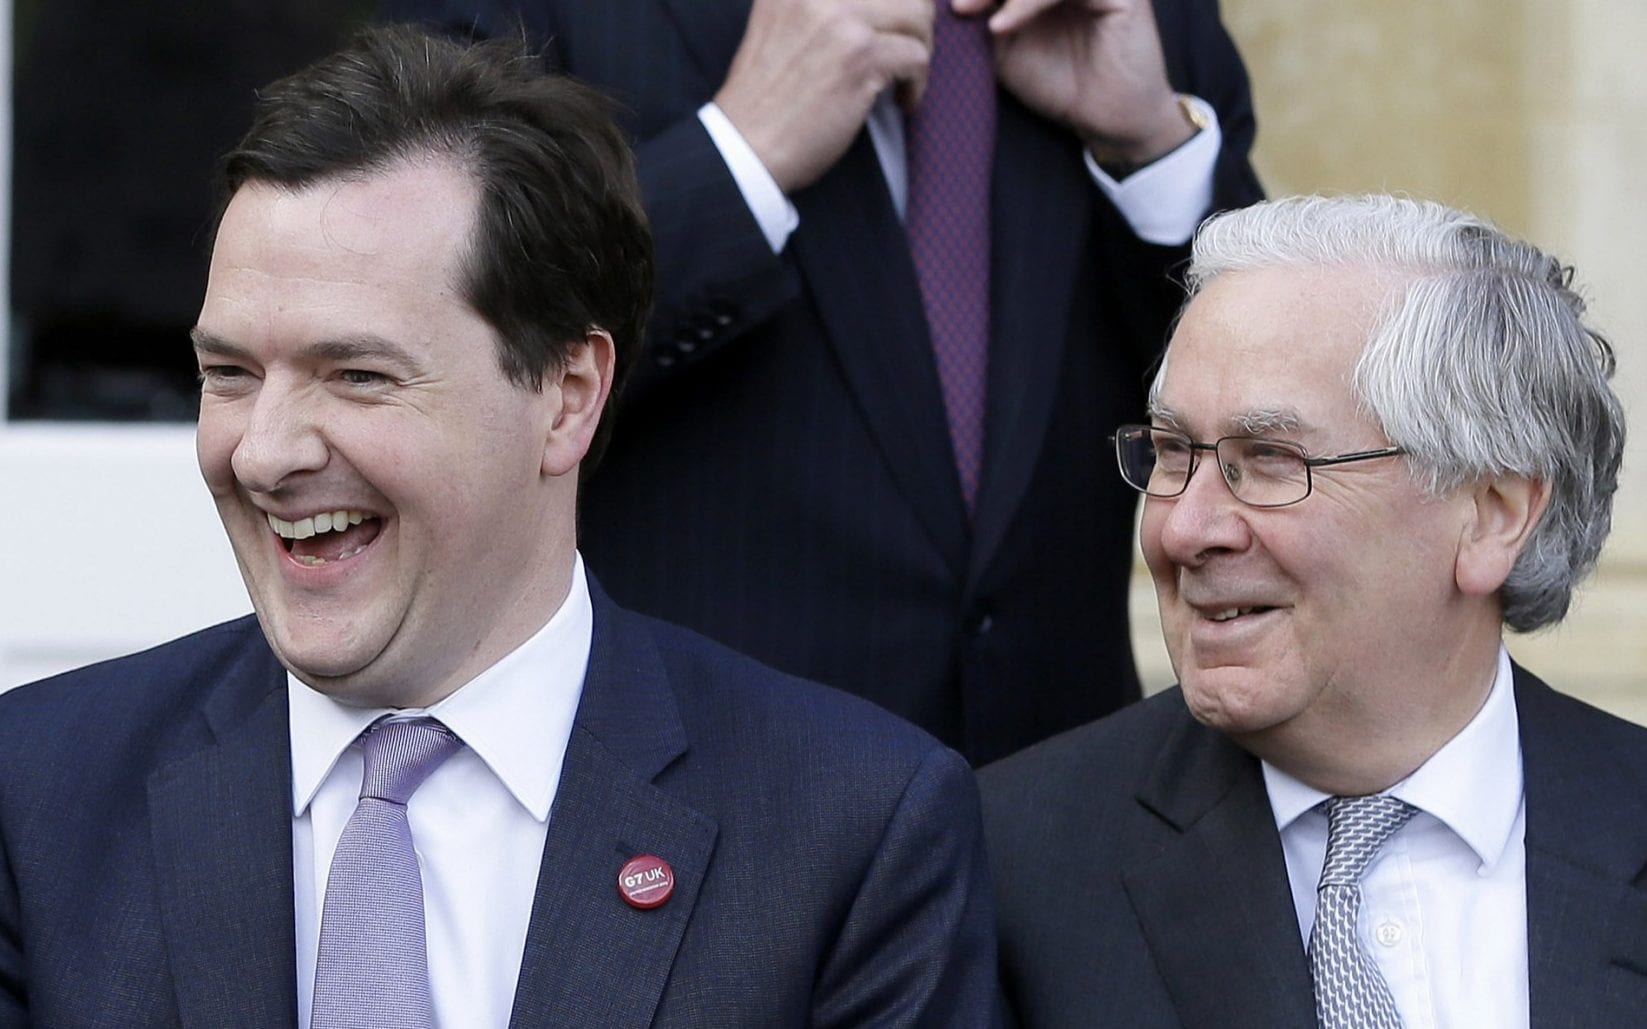 taxpayers brace for £100bn money-printing bill – as george osborne says it’s ‘not my responsibility’